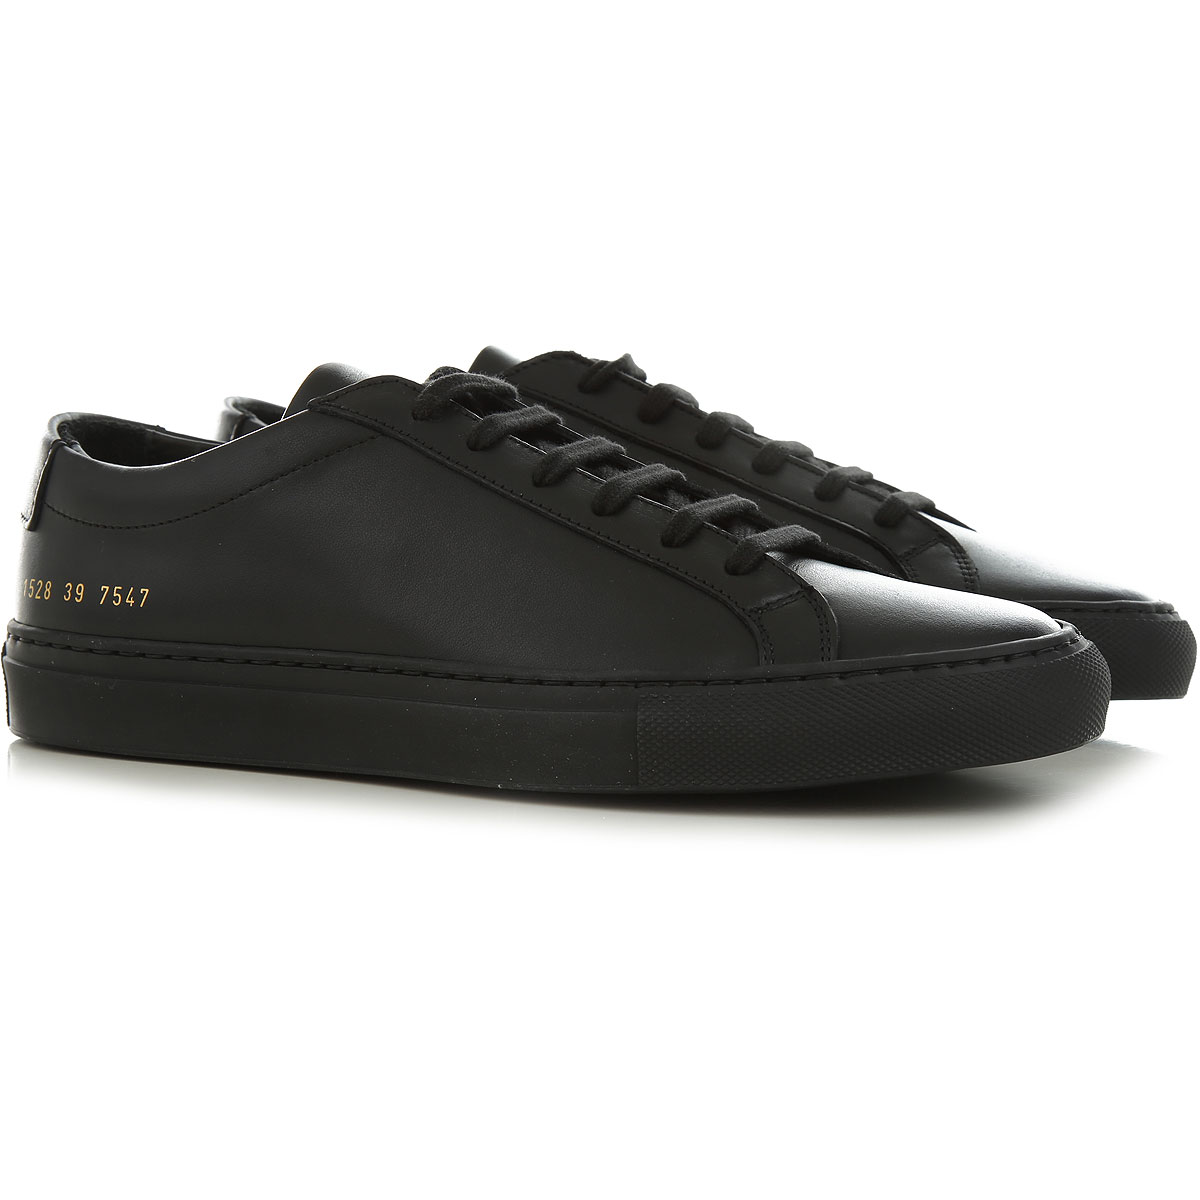 Mens Shoes Common Projects, Style code: 1528-black-